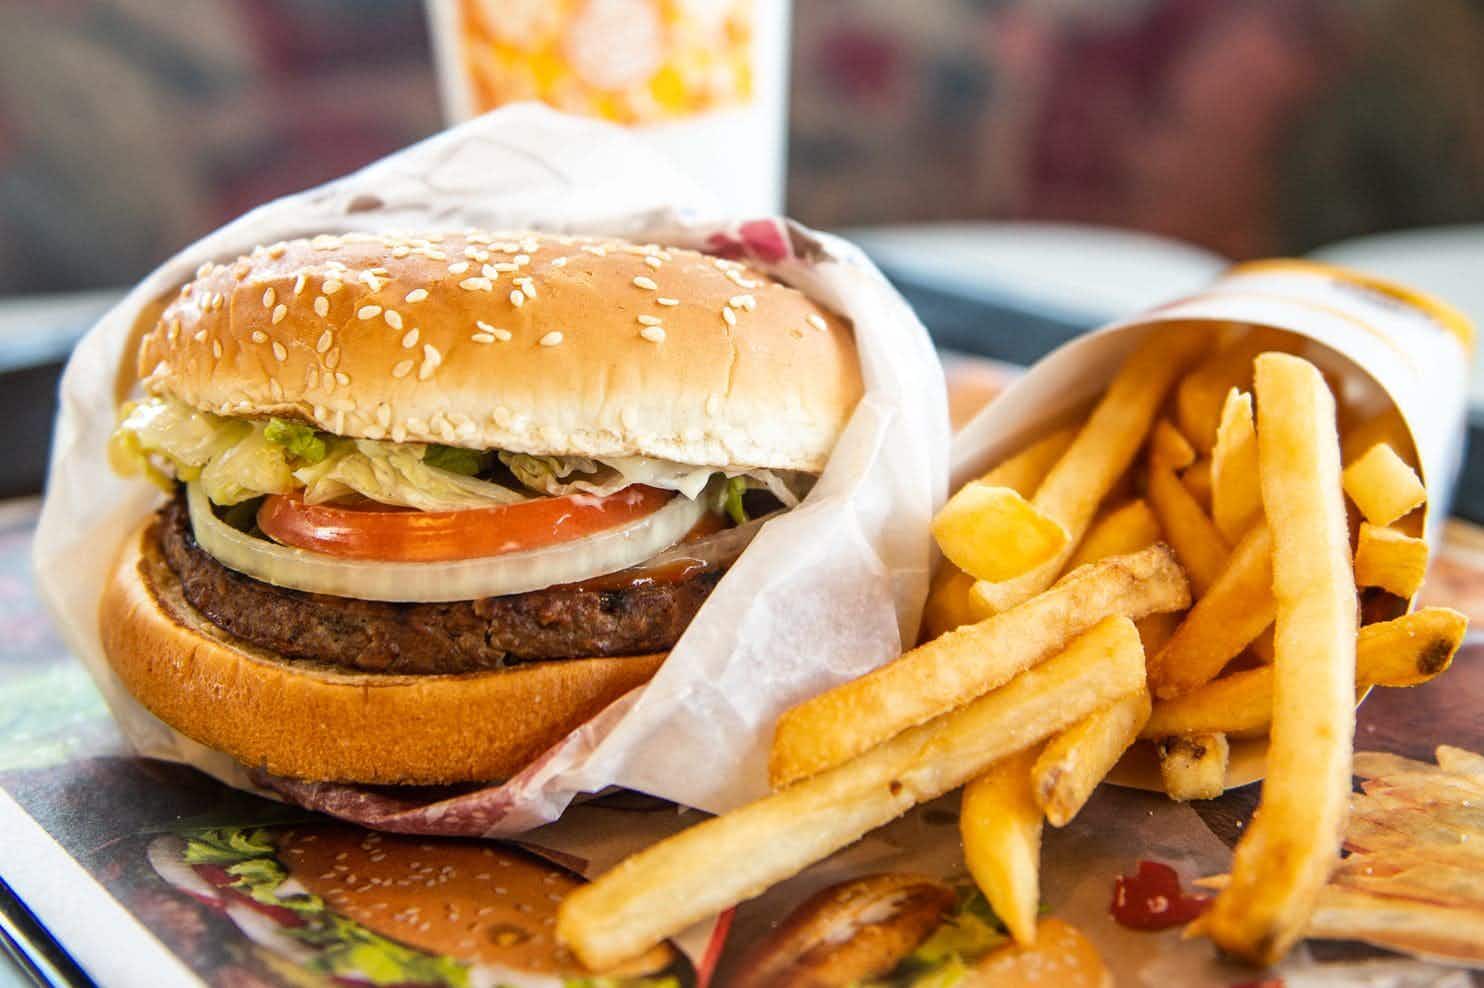 Get a fresher burger by customizing your order.